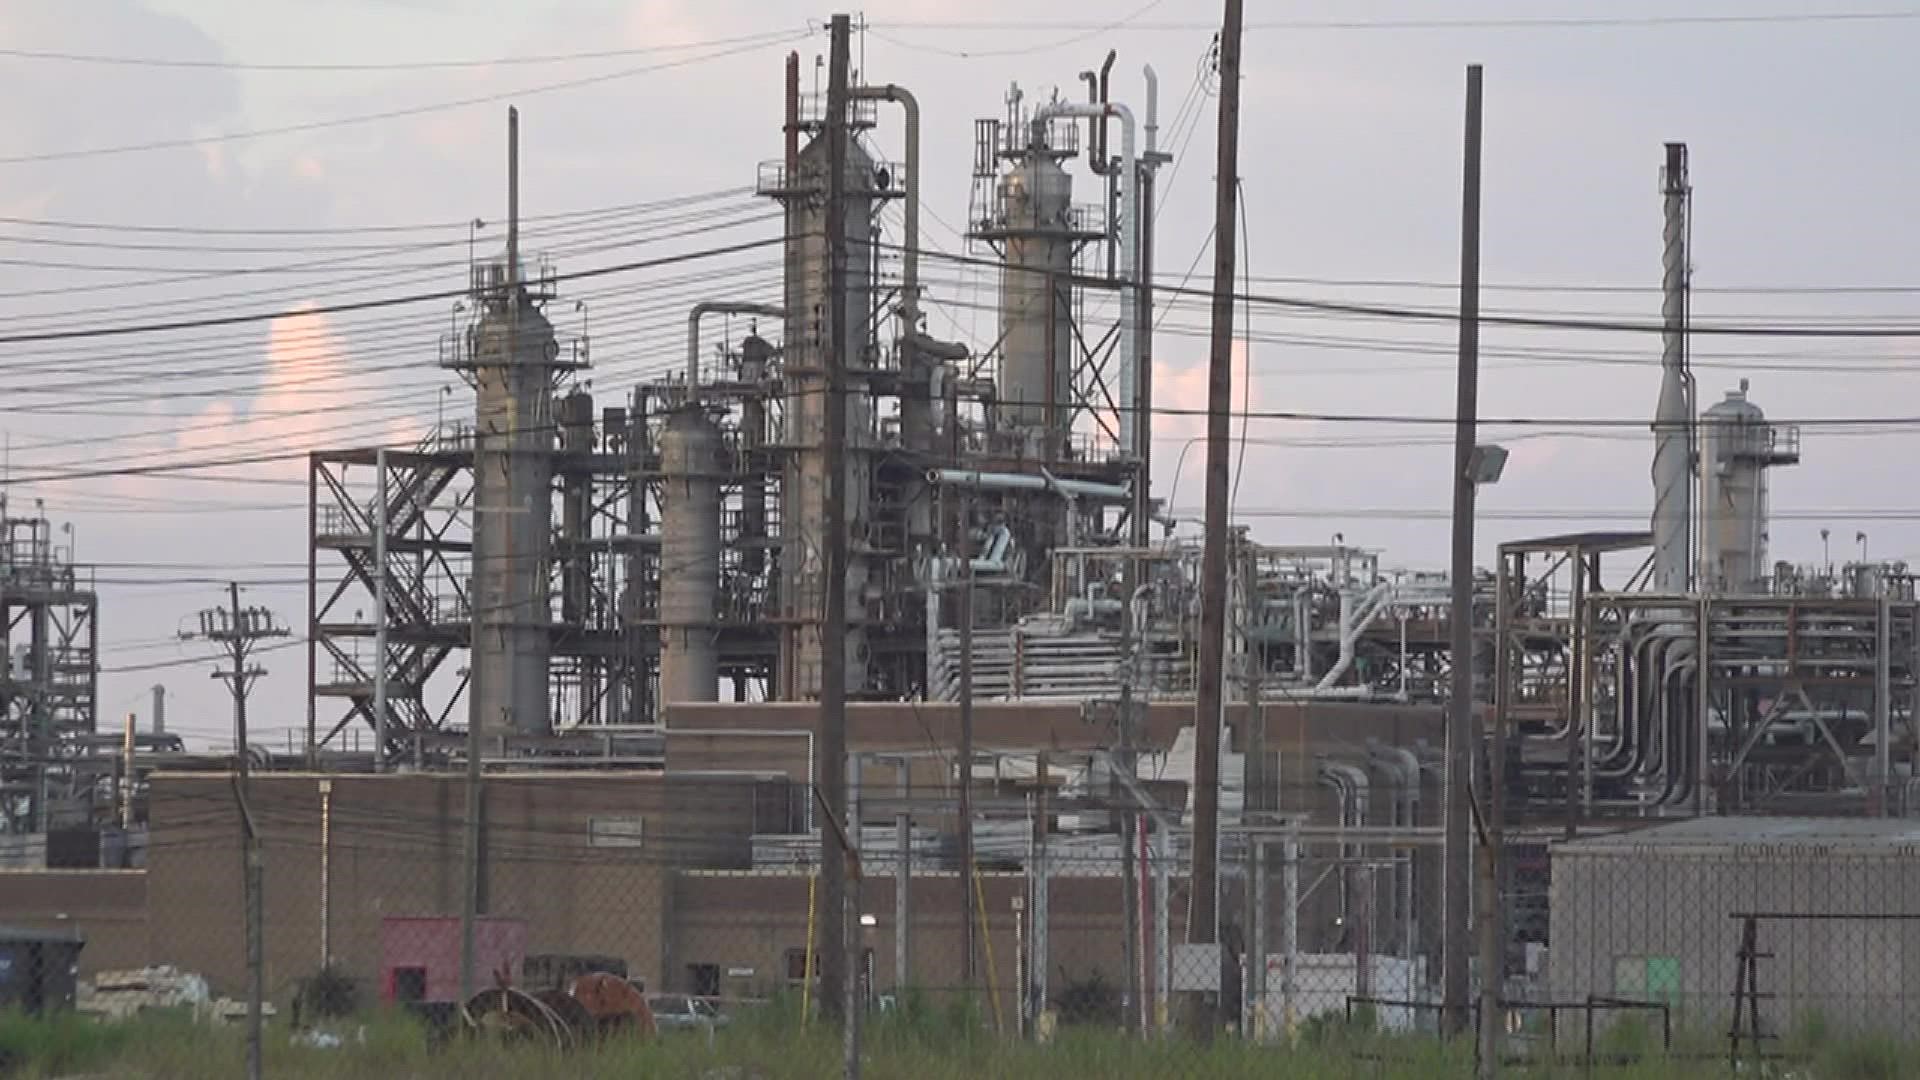 The OCI project involves the DuPont plant located inside Beaumont city limits.